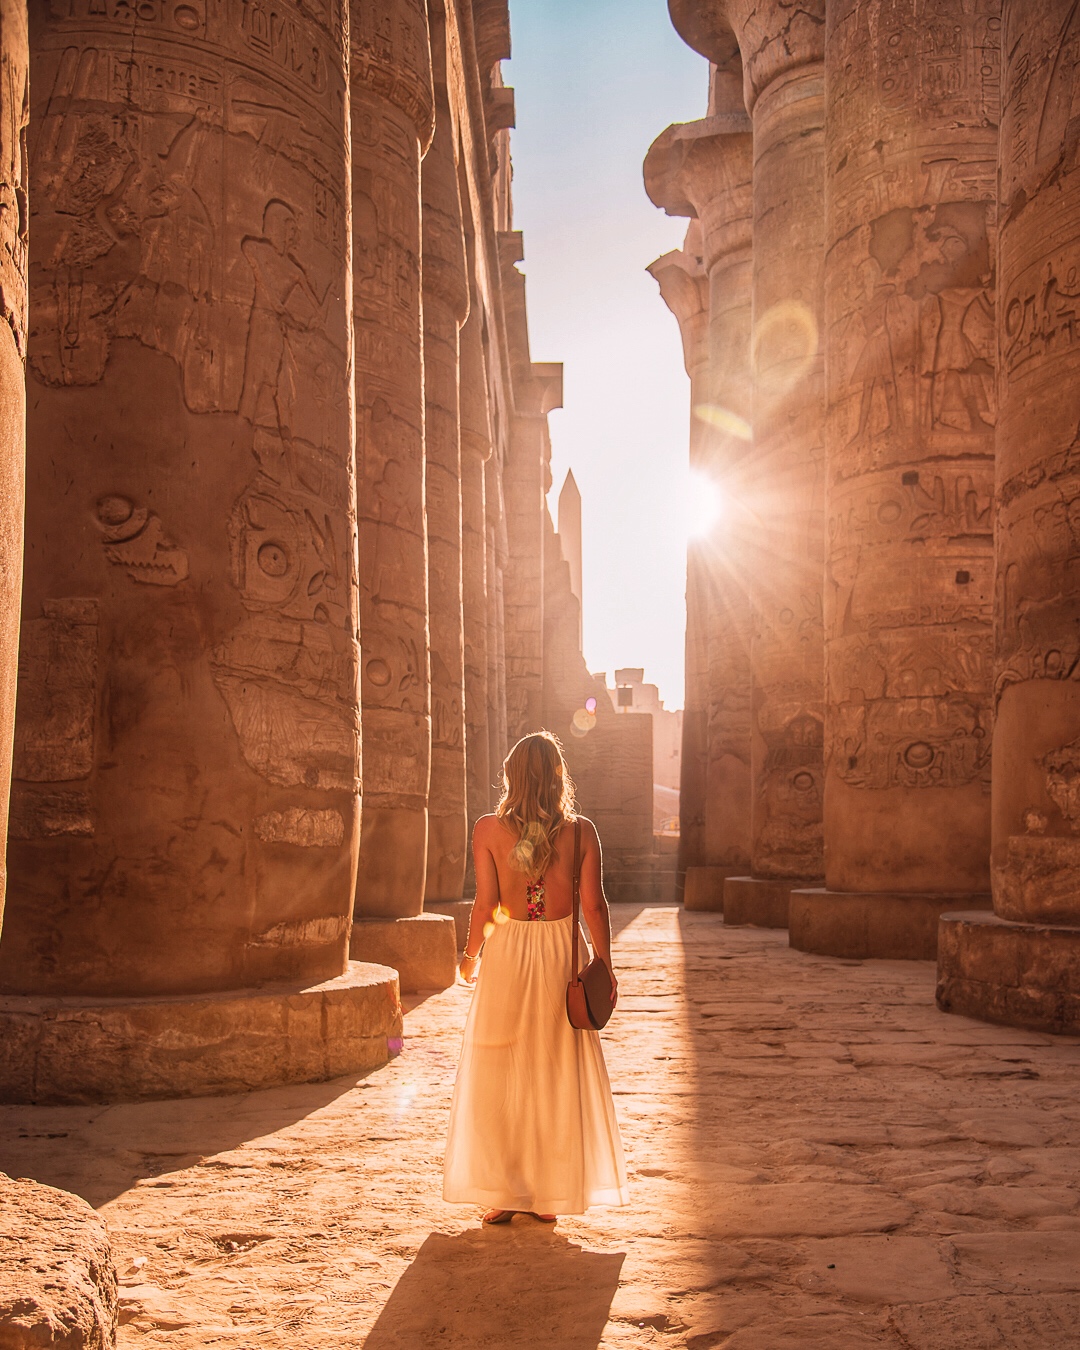 luxor egypt travel guide - what to see in luxor